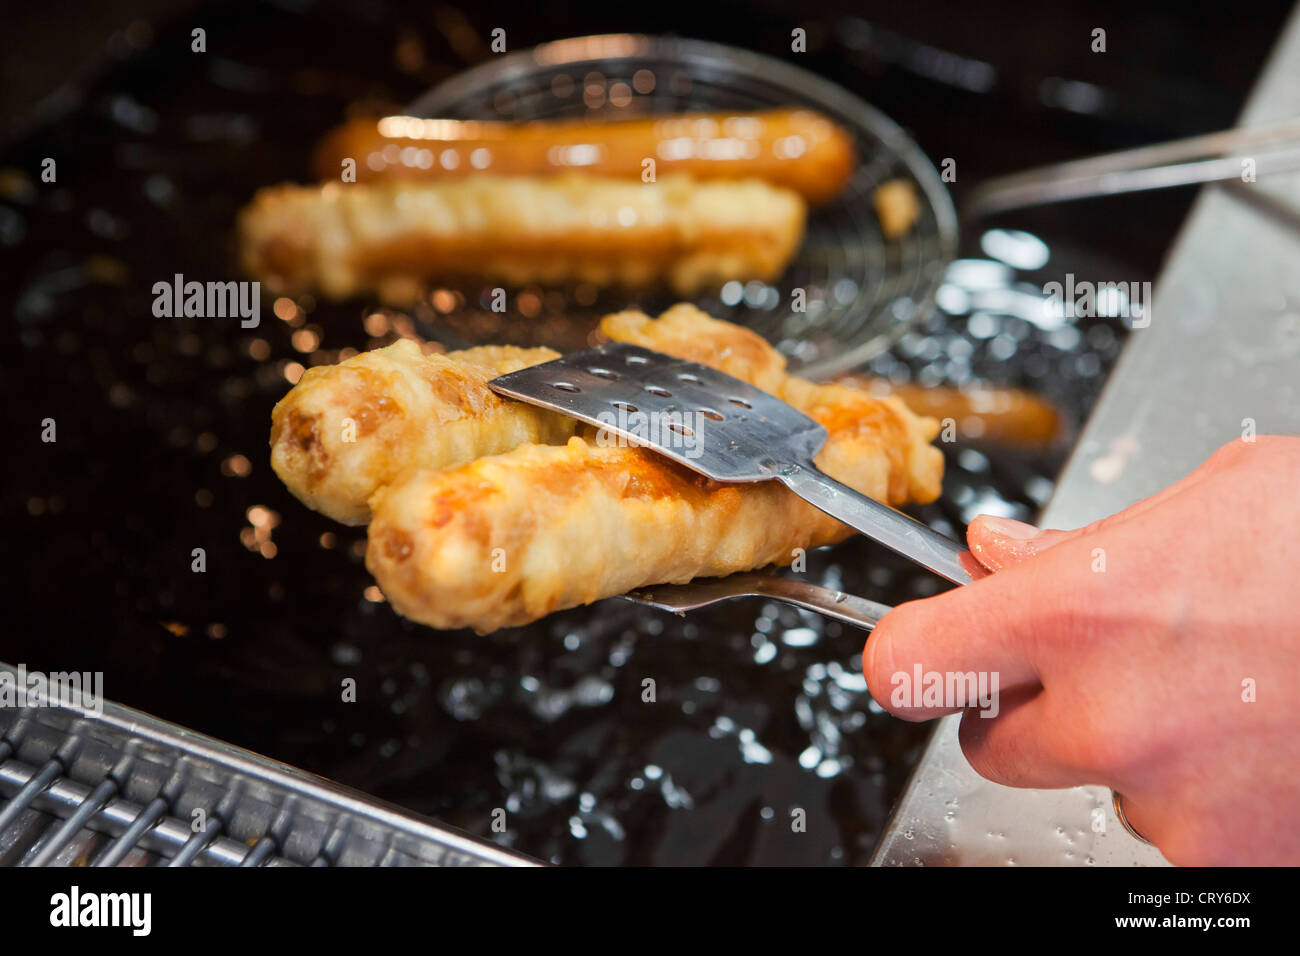 Fried battered sausage from traditional British chip shop Stock Photo